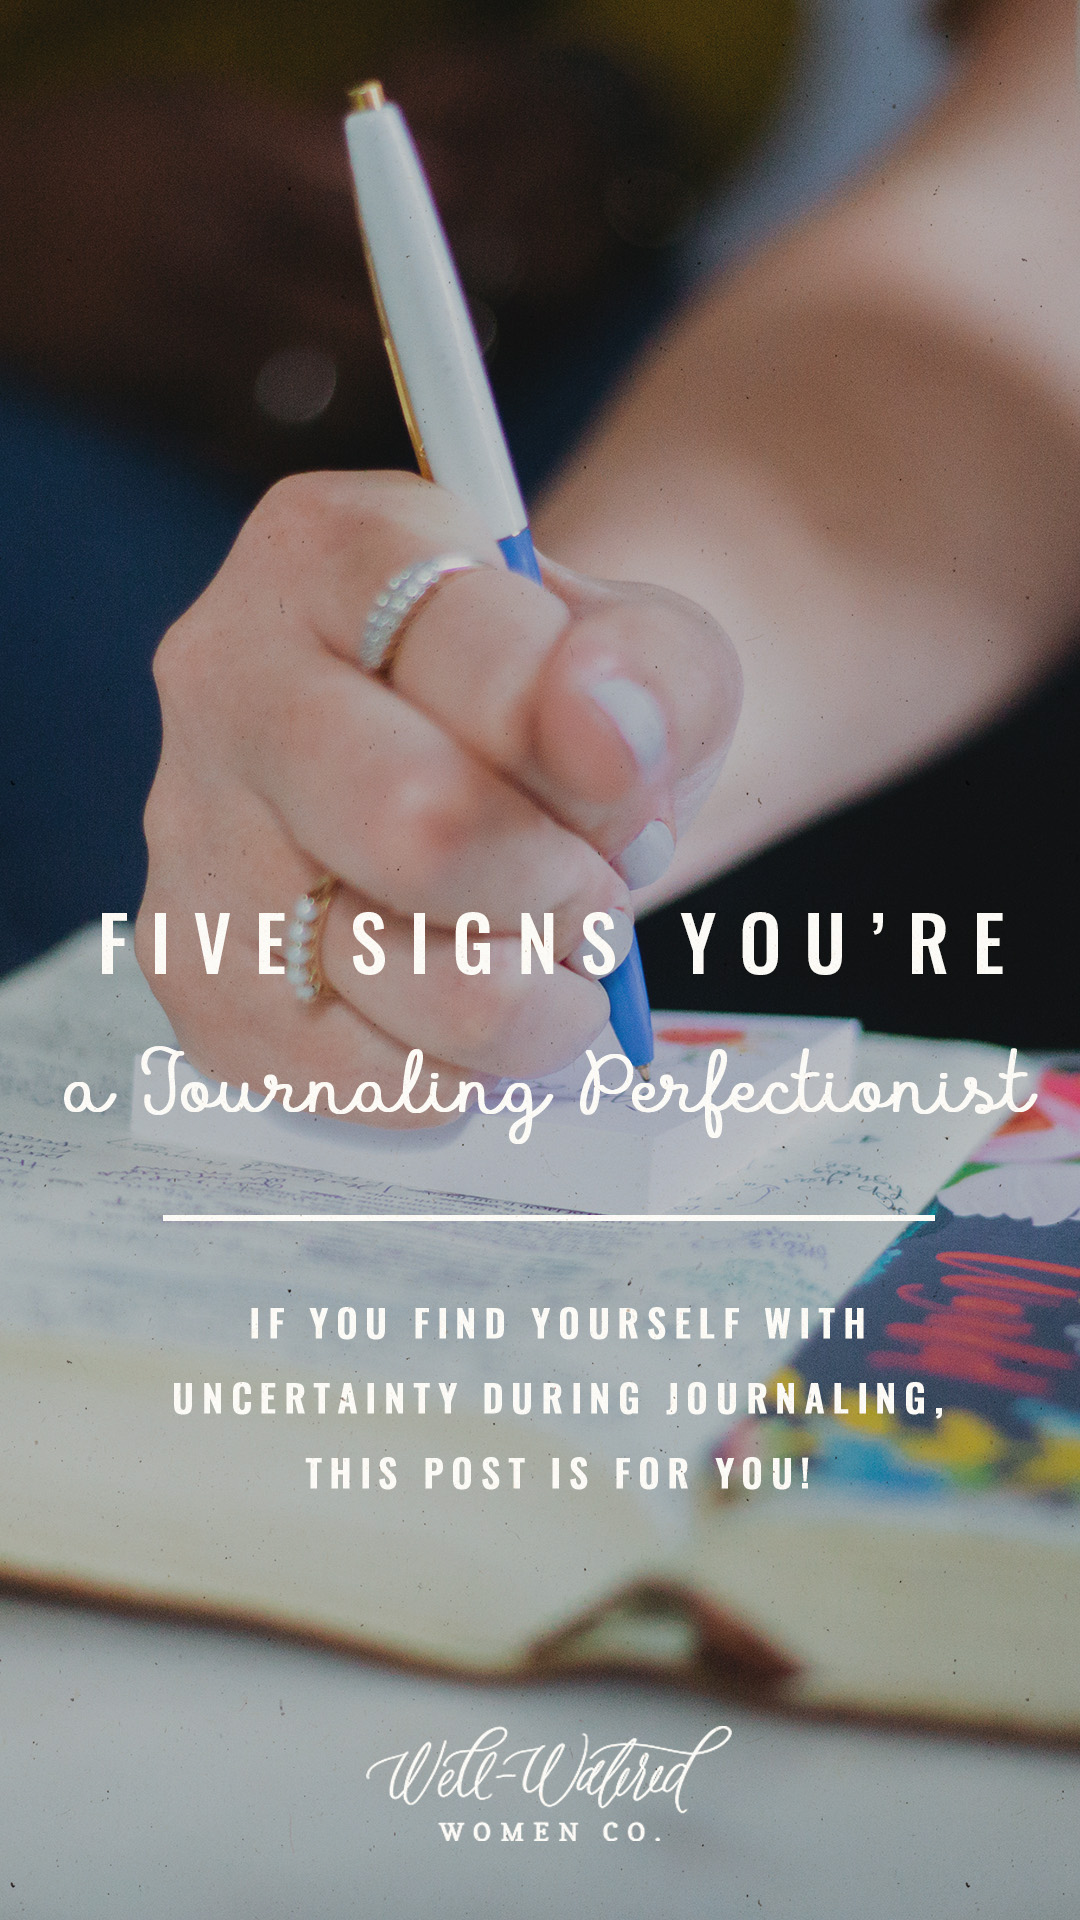 Well Watered Women Blog | Five Signs You're a Journaling Perfectionist